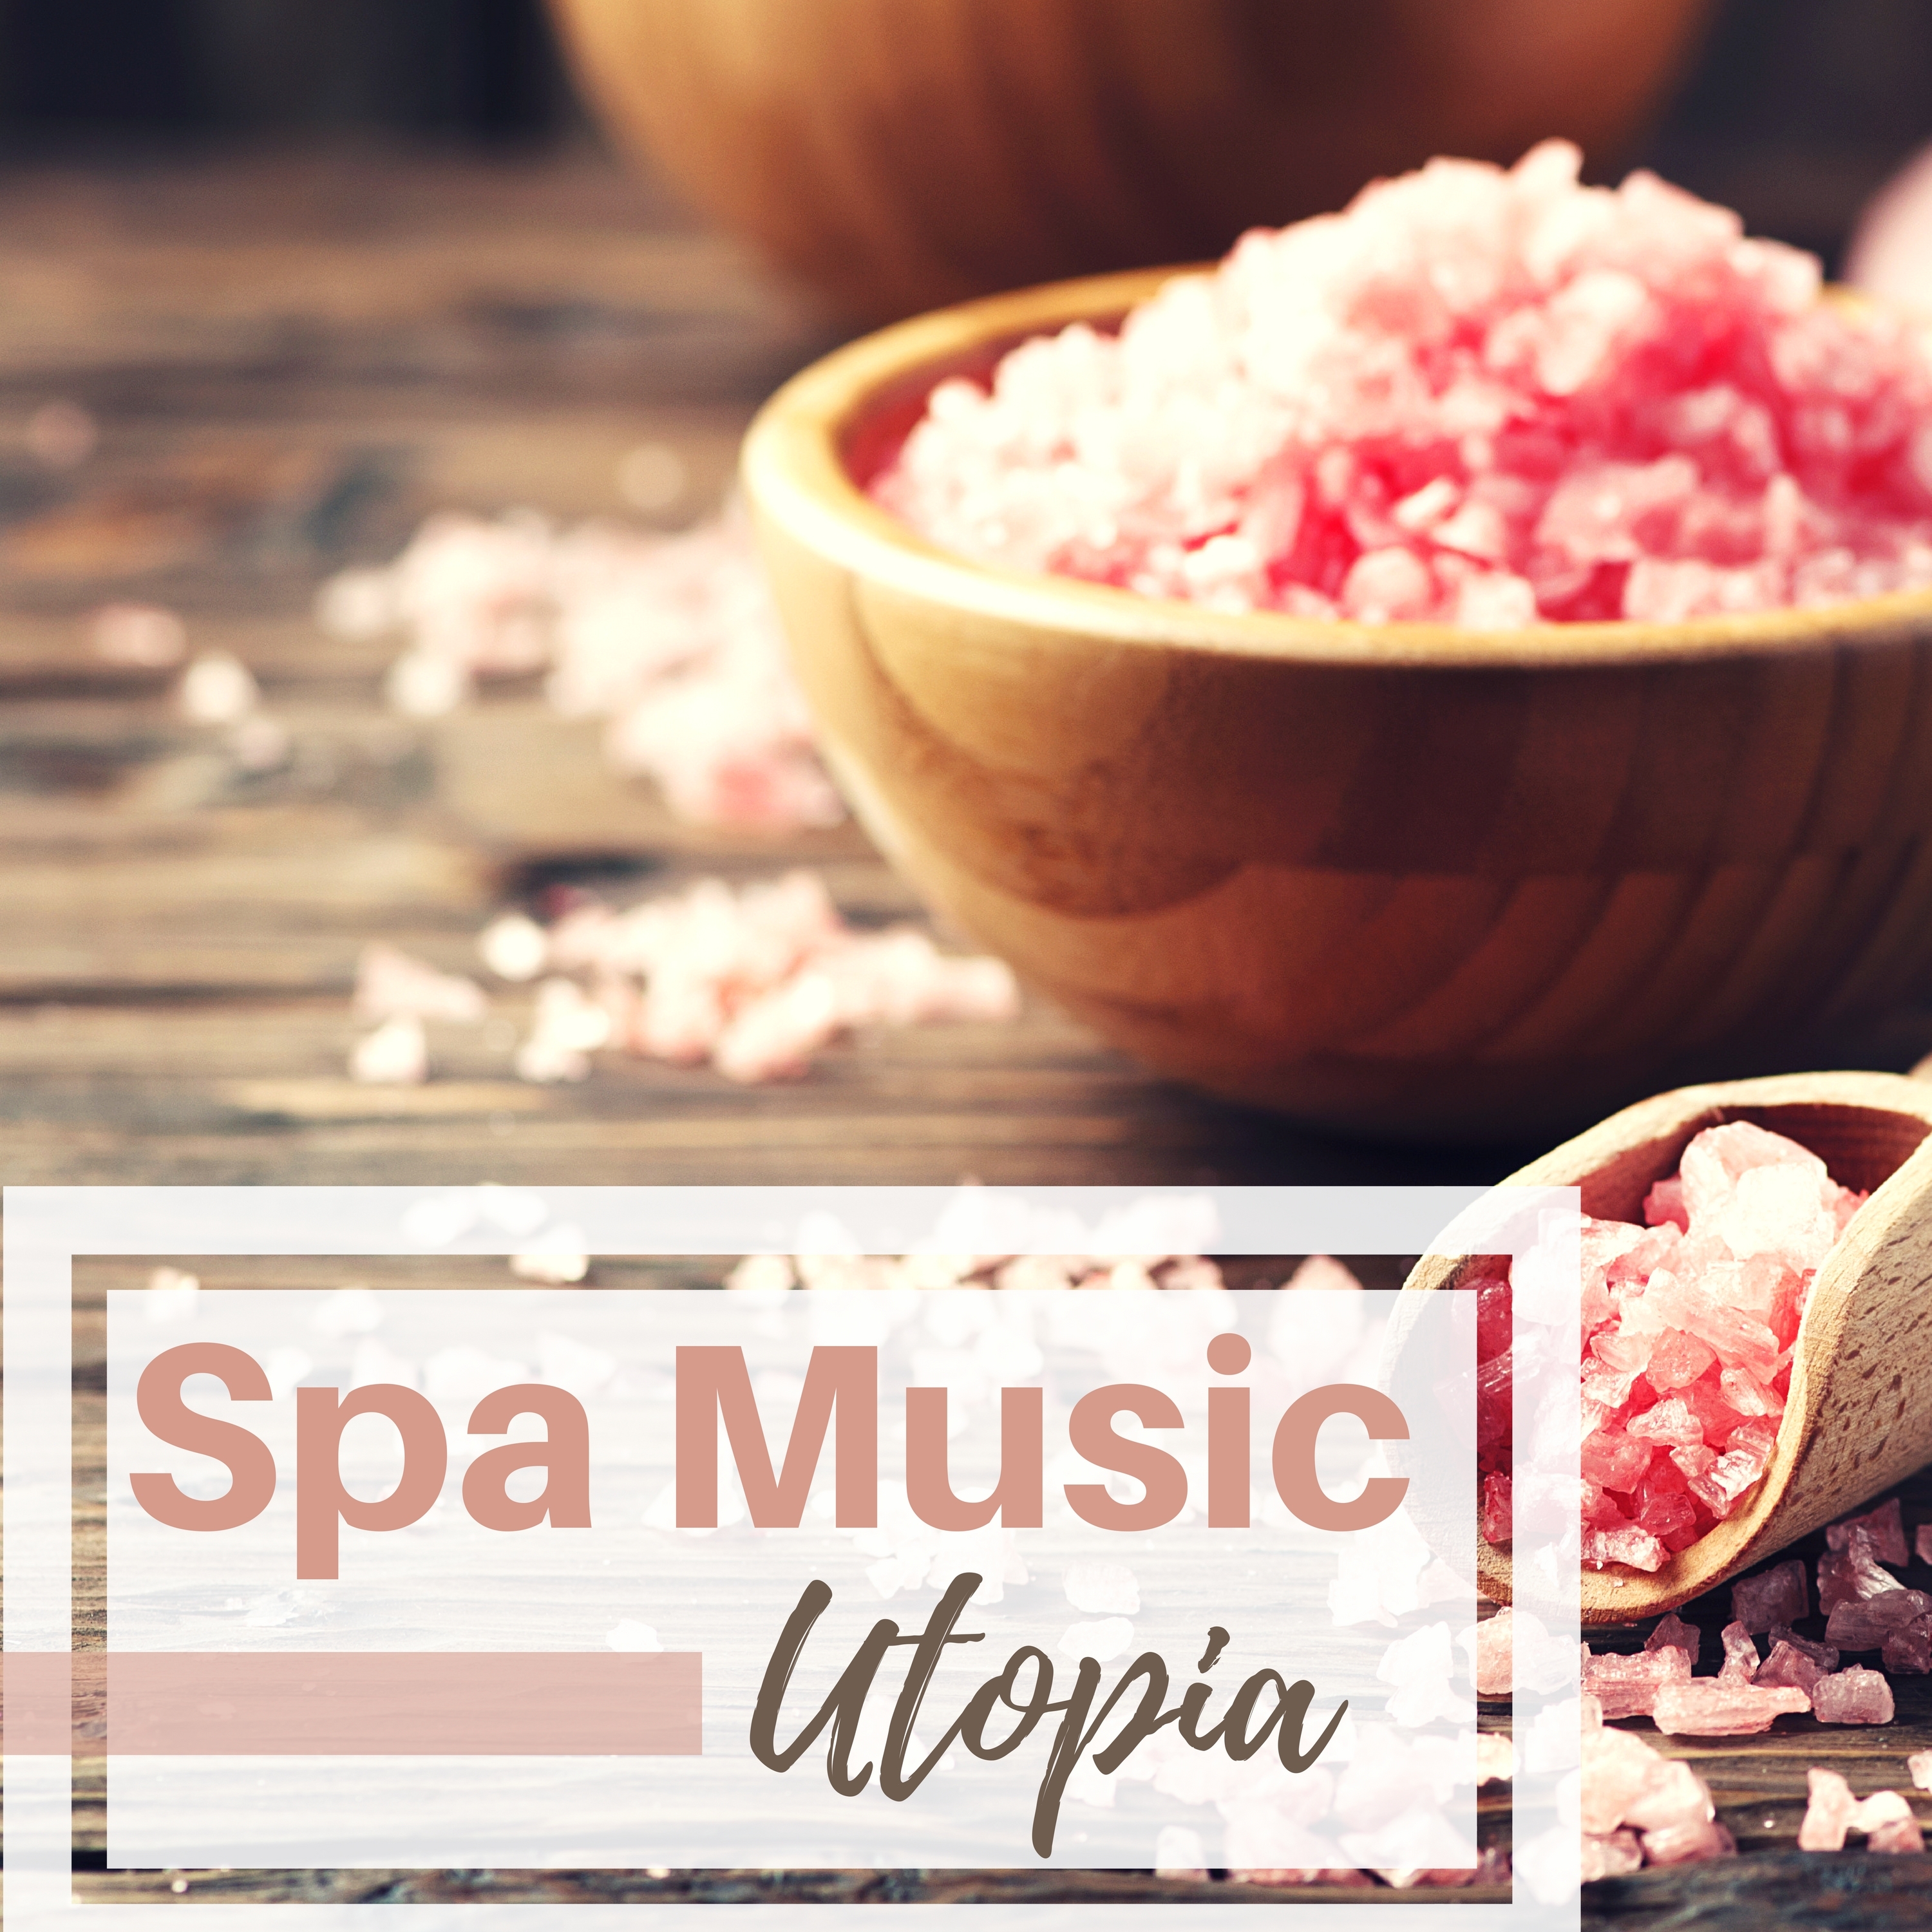 Spa Music Utopia - Serenity Songs for Relaxation with Tibetan Singing Bowls